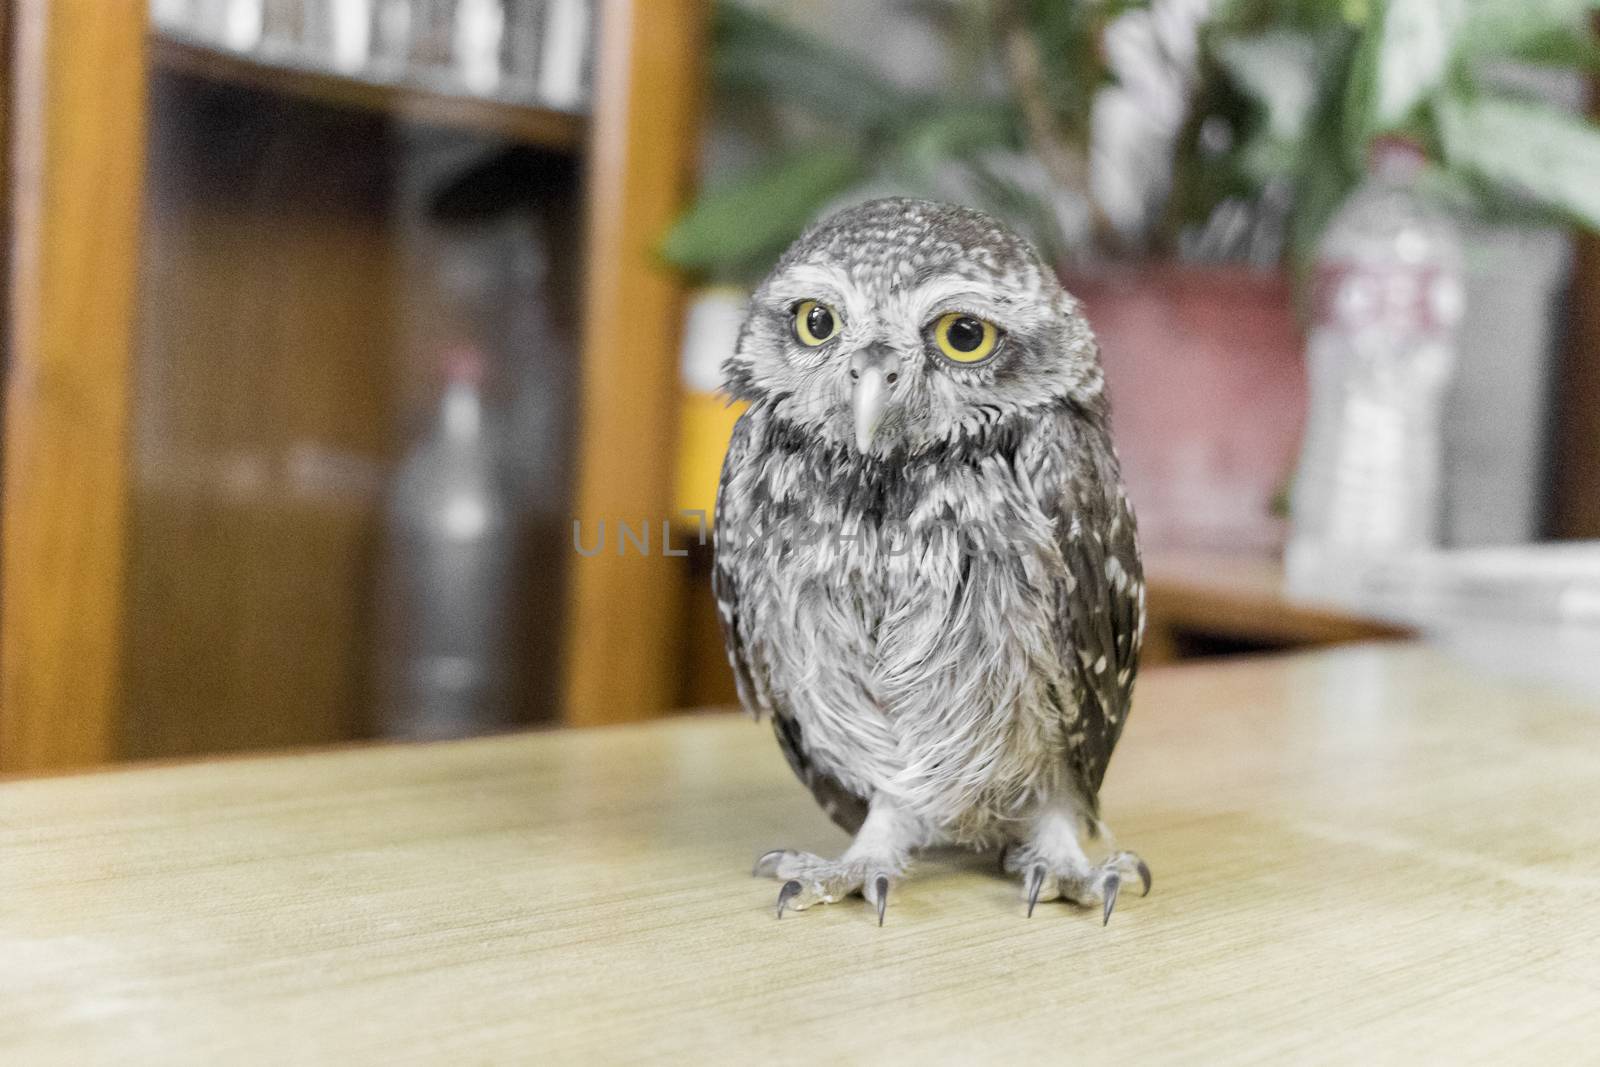 Rare and cute owl baby with big yellow eyes from Pokhara in Nepal.